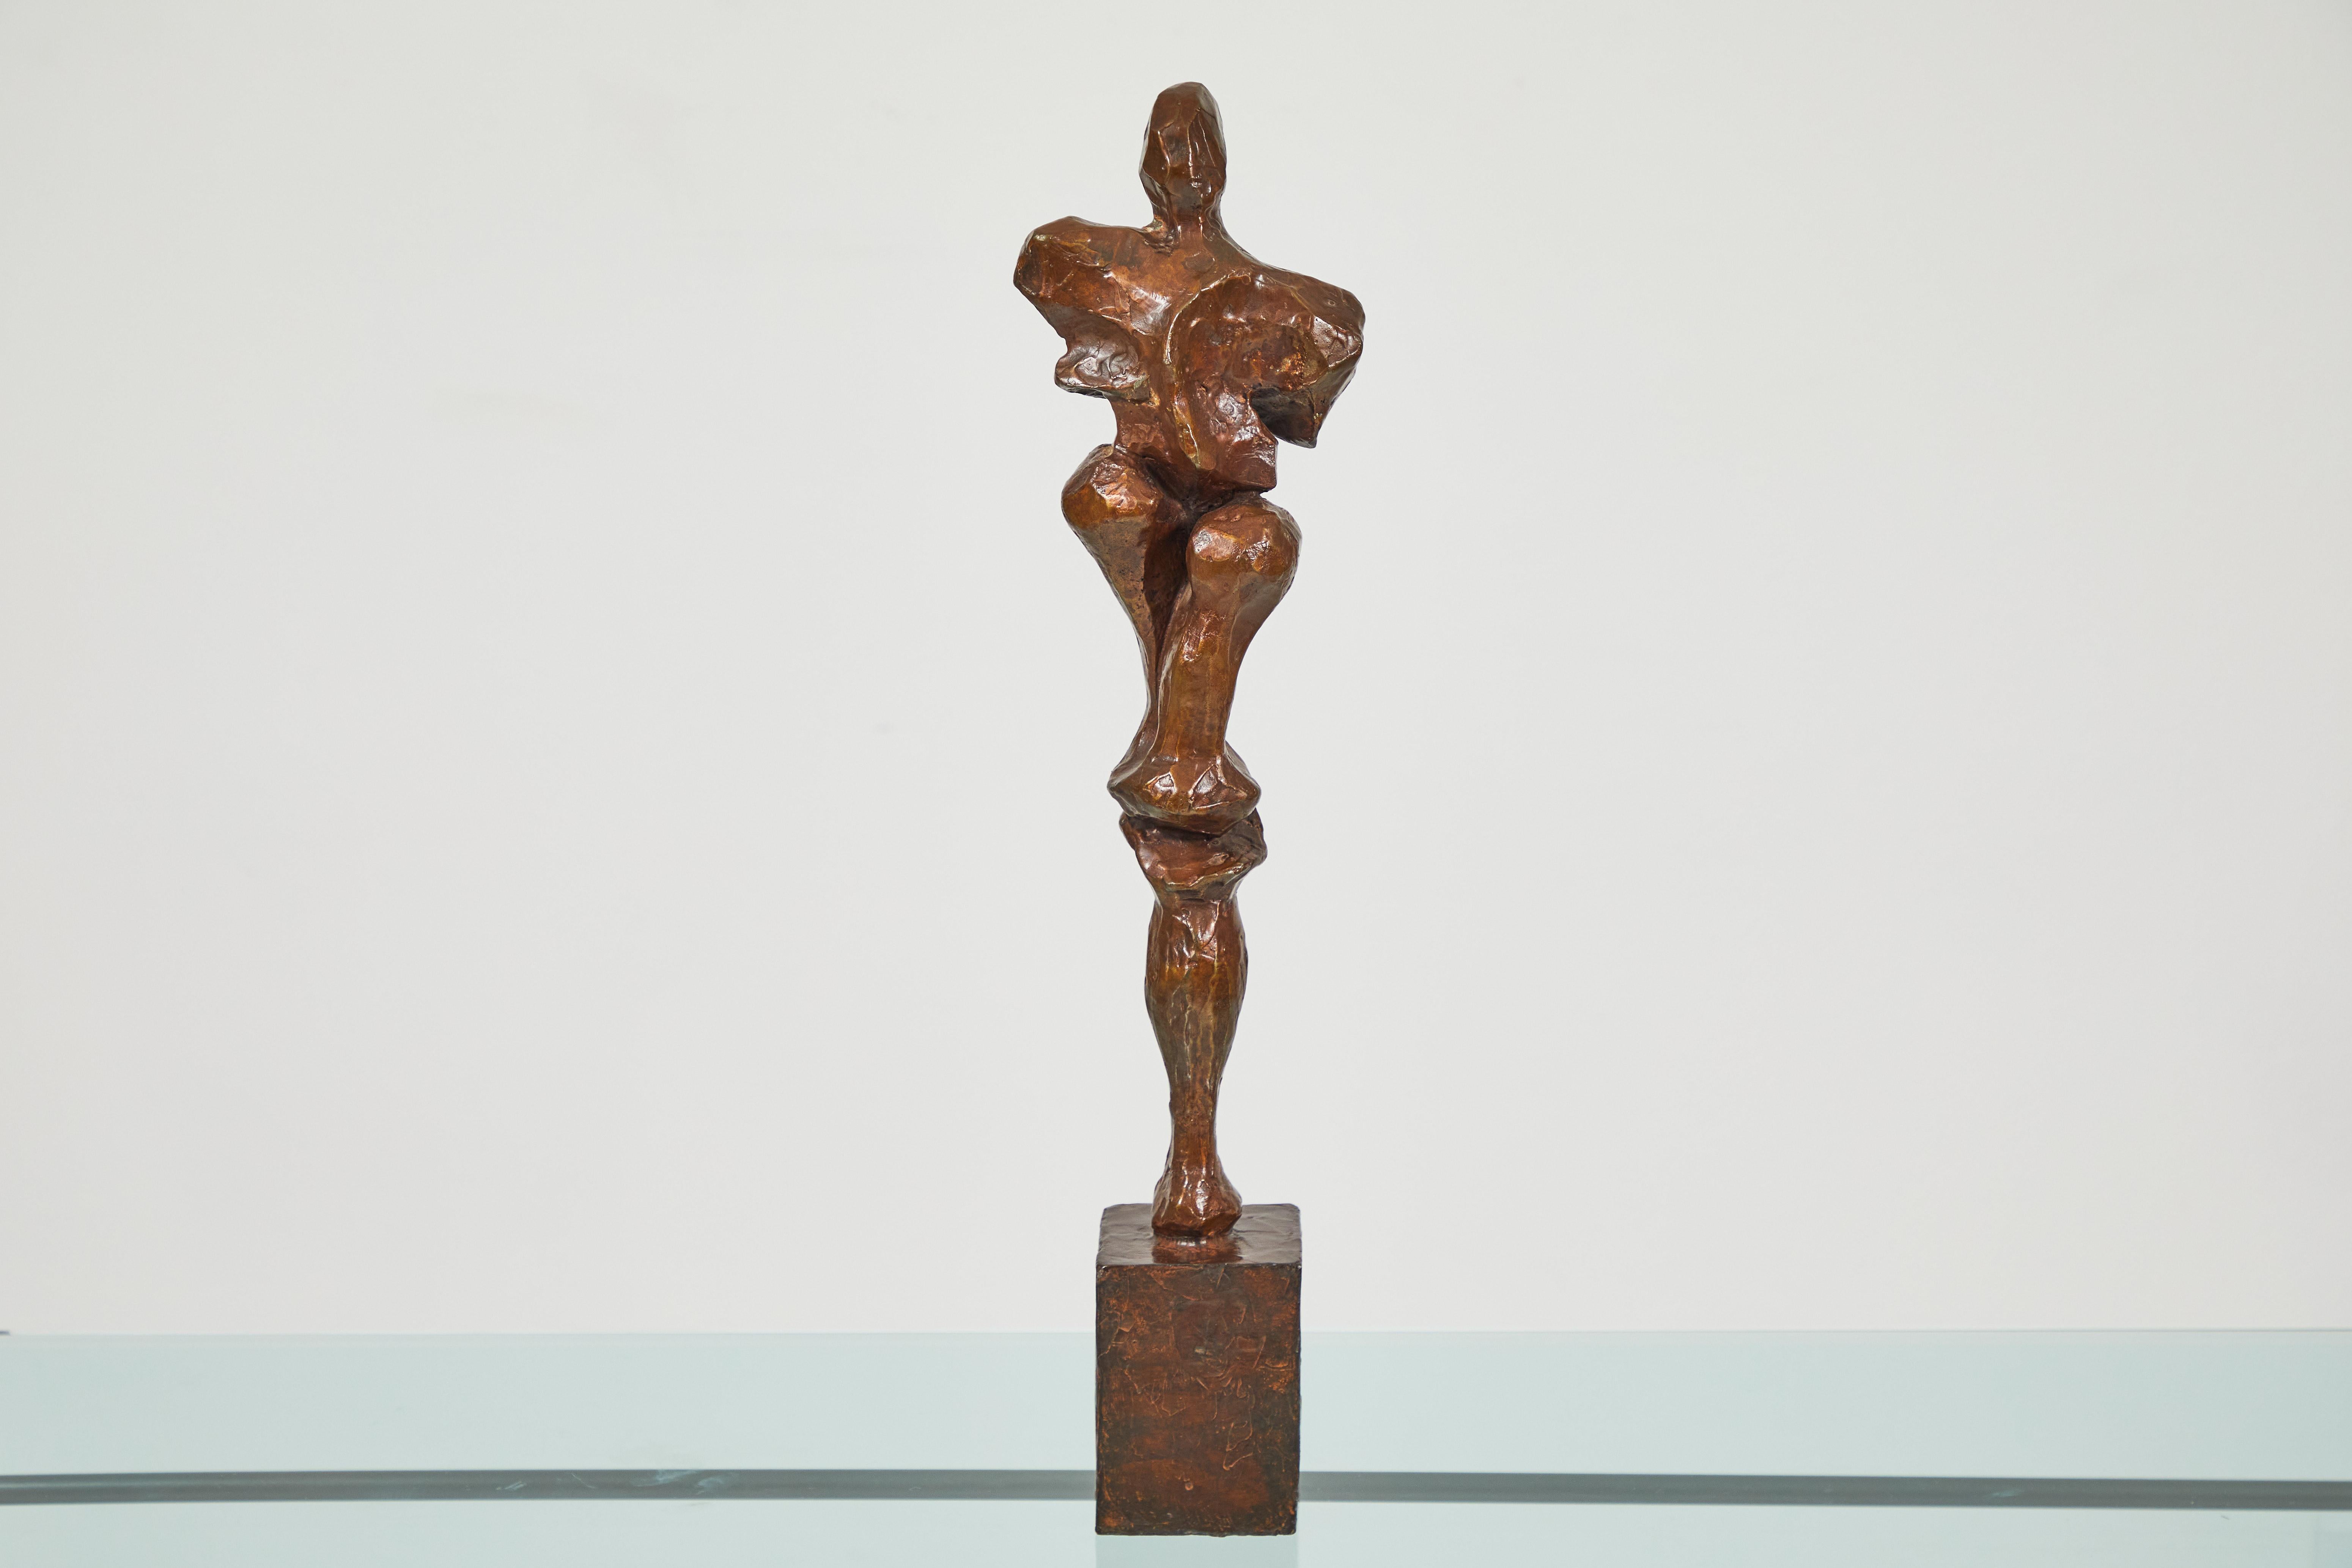 This is a wonderful abstract figure in bronze by well known sculpture, Sanford (Sandy) Decker. The patina is a beautiful shade of chocolate brown. It has aged well, bronze highlights can be seen. The base is bronze and a part of the sculpture . It